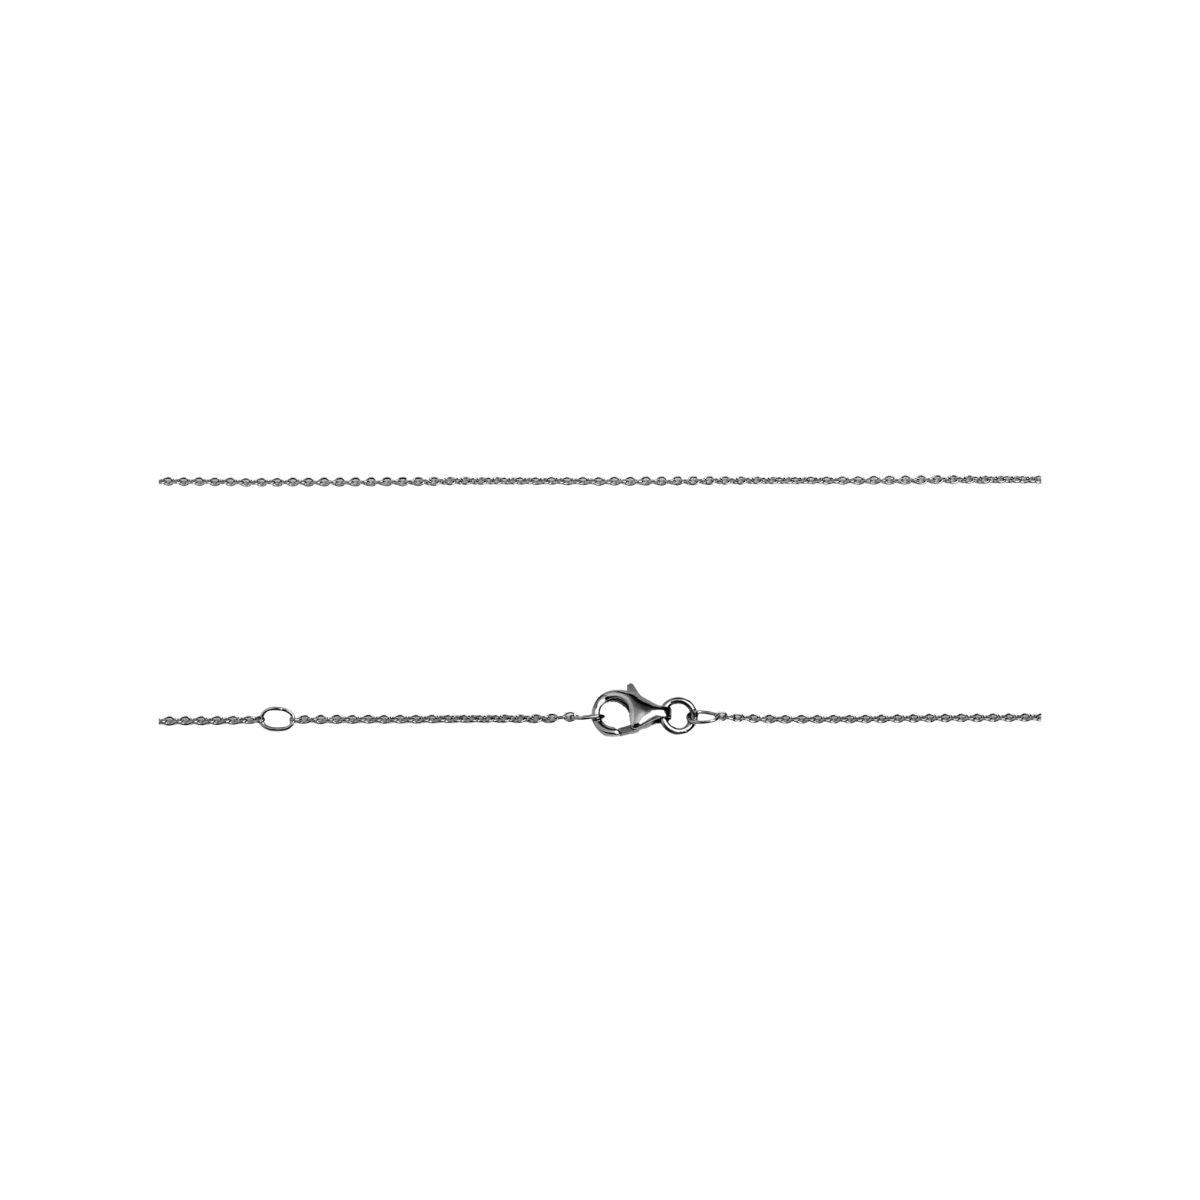 Bridget King Mini Link Adjustable Chain in Oxidized Sterling Silver